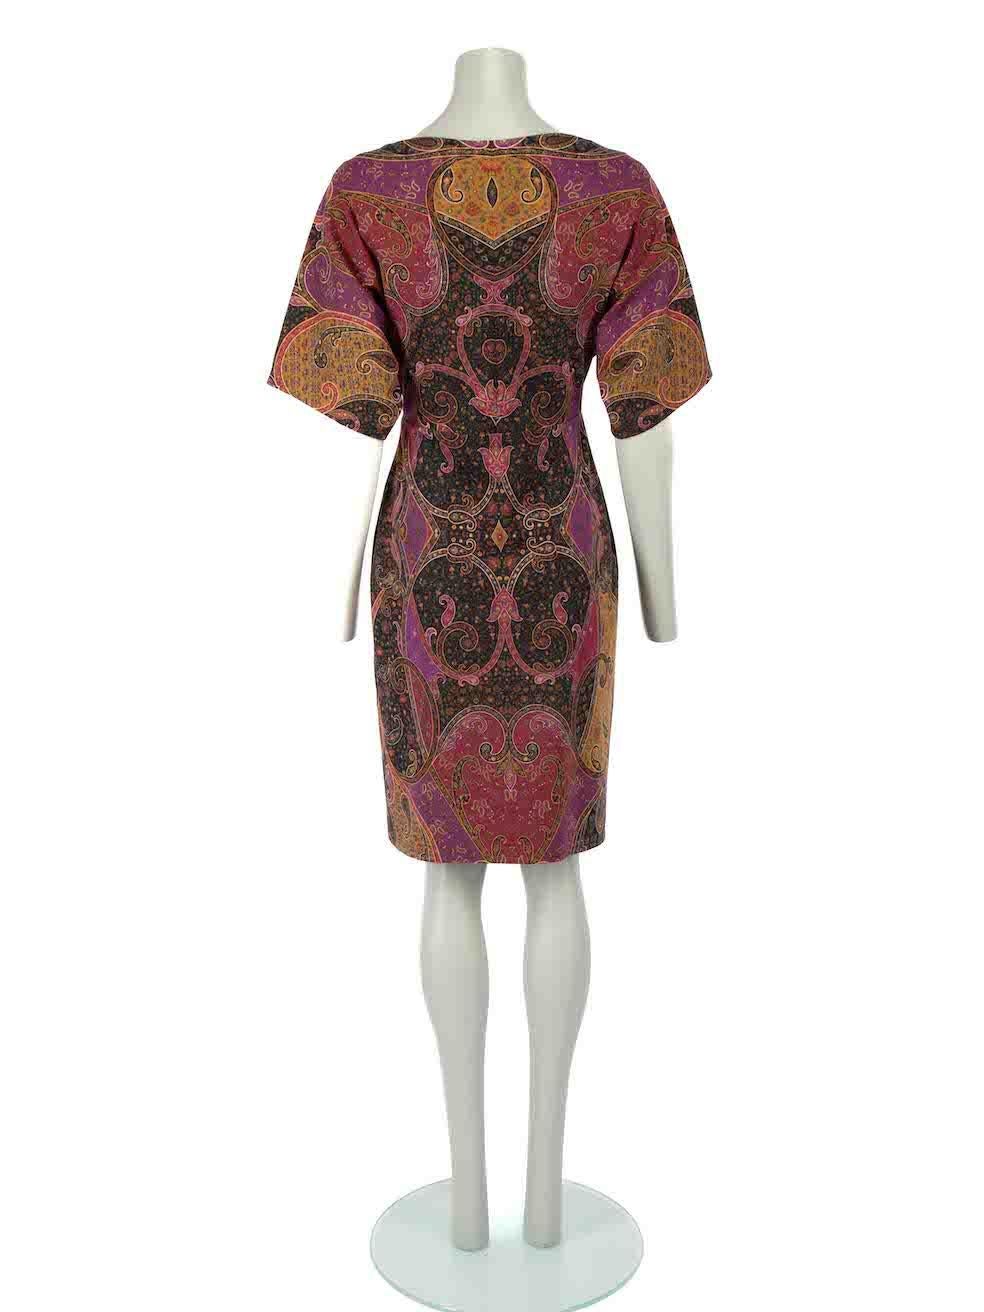 Etro Patterned Knee-Length Dress Size S In Good Condition For Sale In London, GB